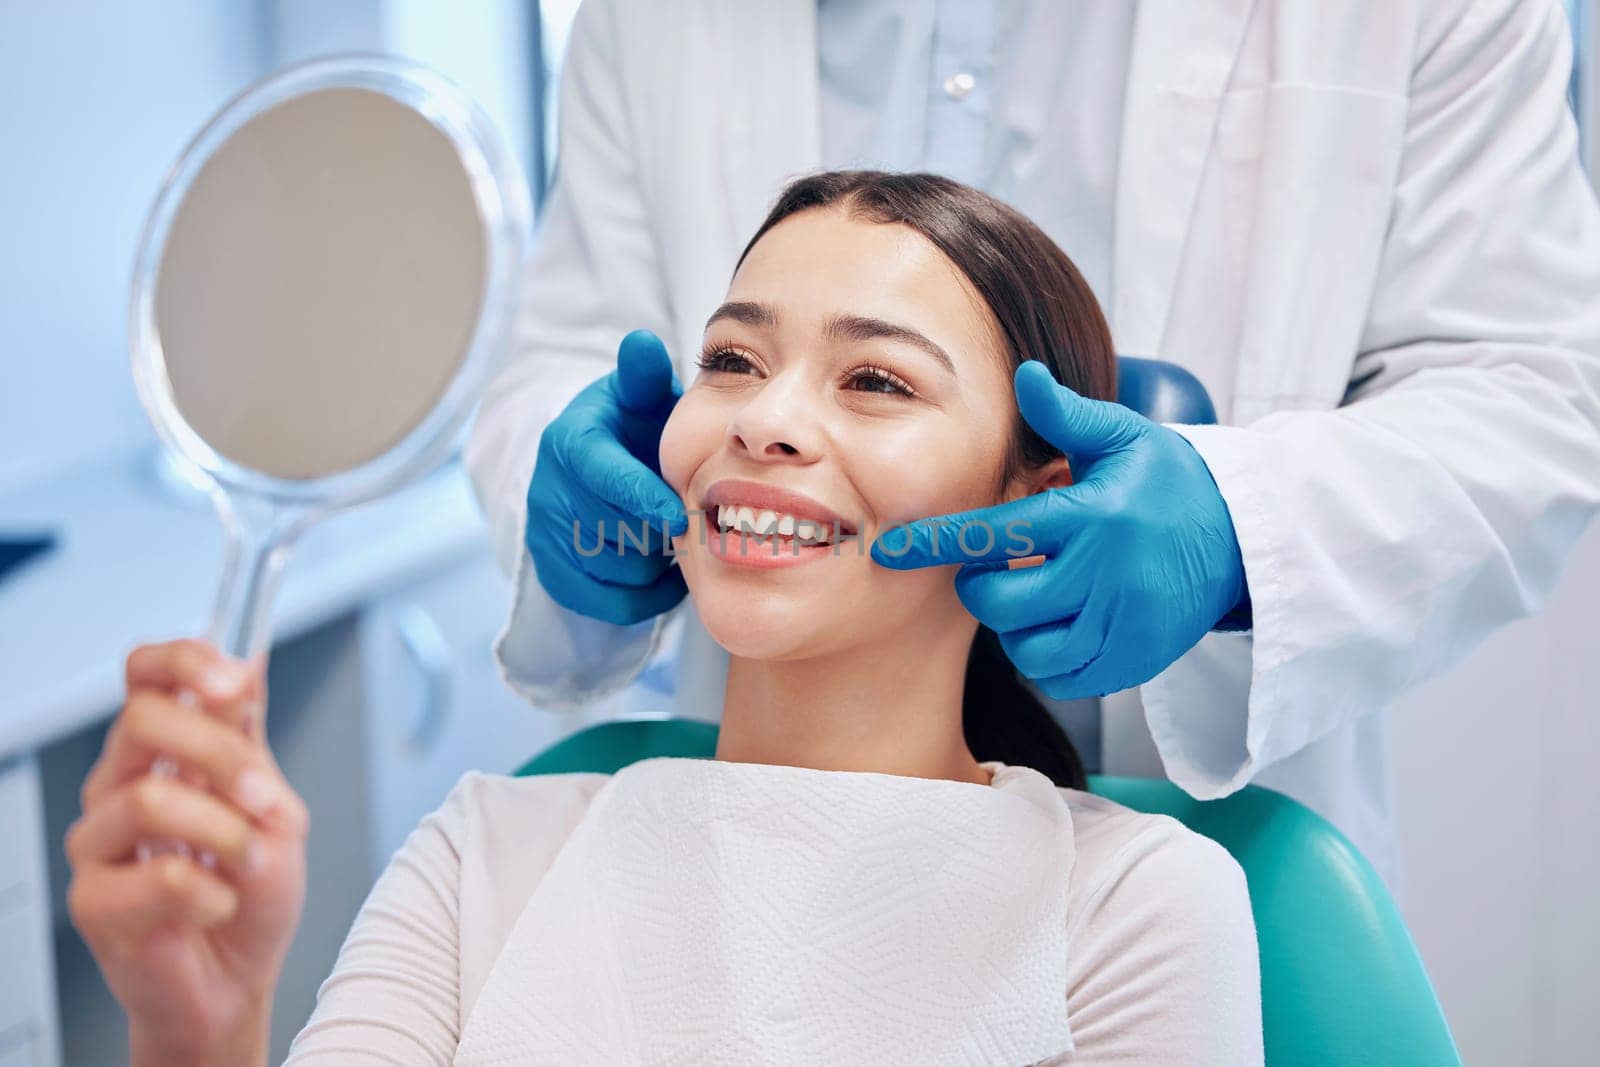 Dentist, mirror and woman with smile after consulting for teeth whitening, service and dental care. Healthcare, dentistry and female patient with orthodontist for oral hygiene, wellness and cleaning.